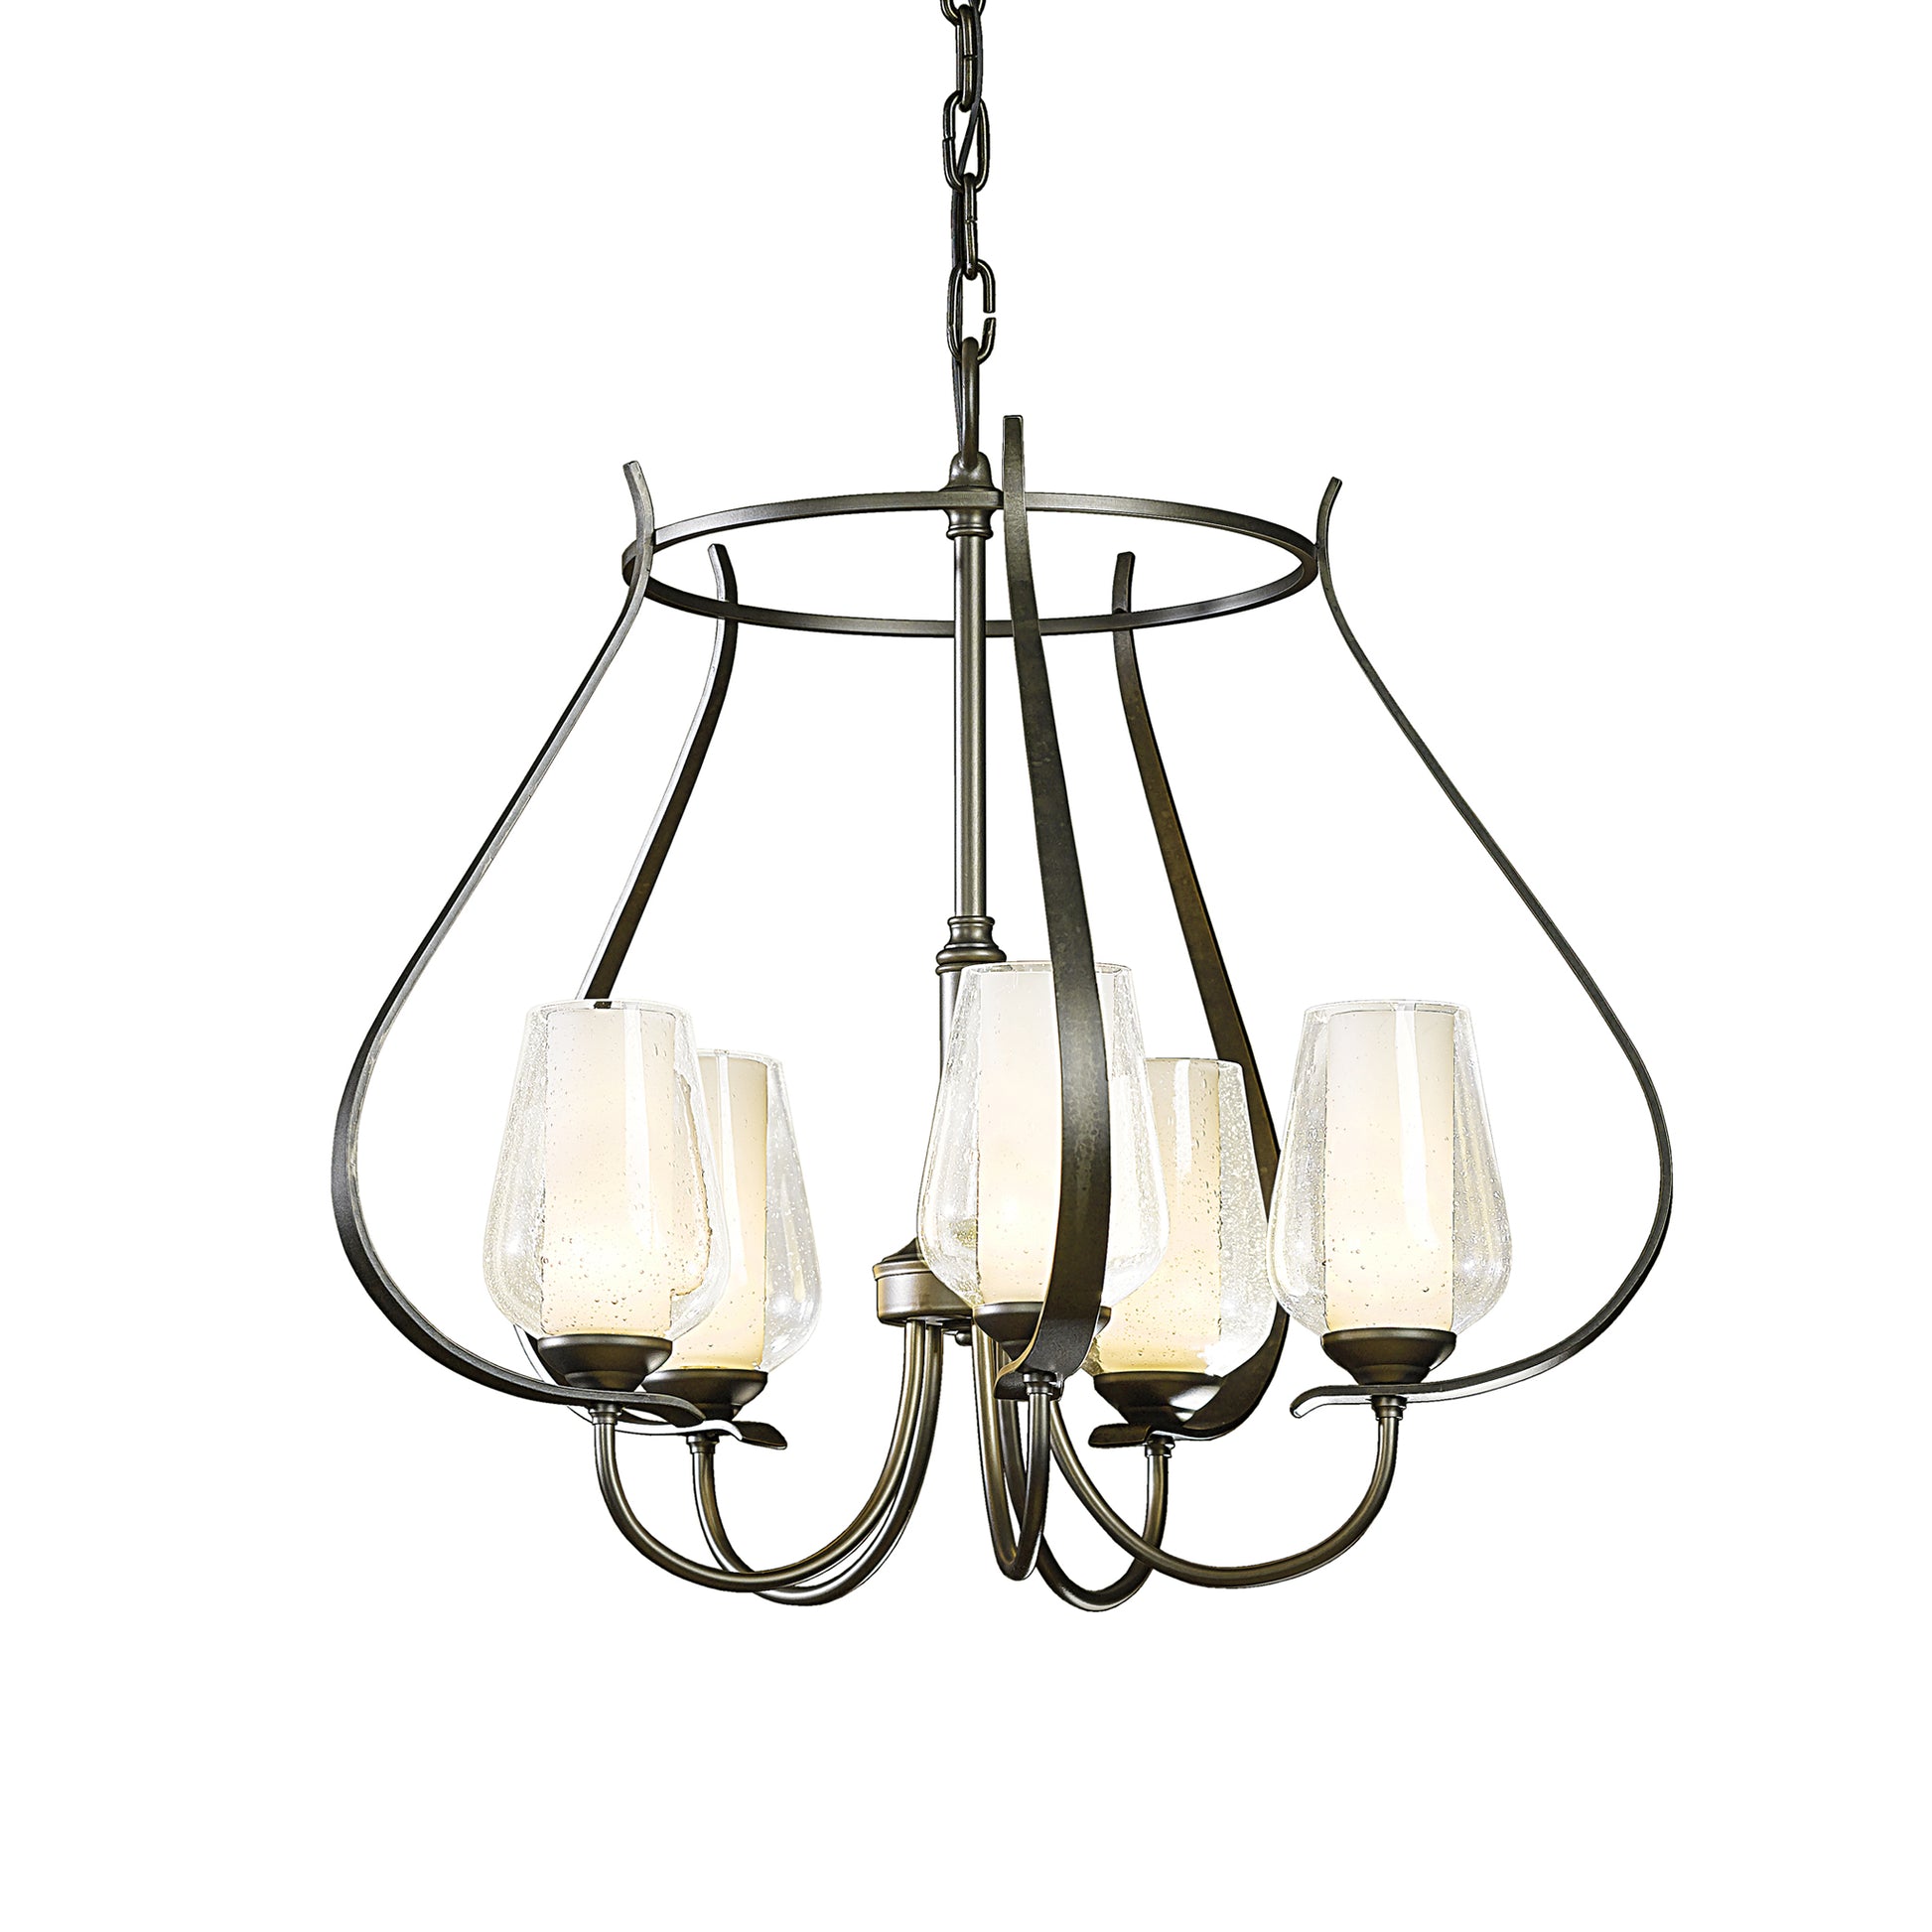 The Flora Chandelier by Hubbardton Forge features a stunning design with five frosted glass shades, crafted using environmentally safe metal forging techniques.